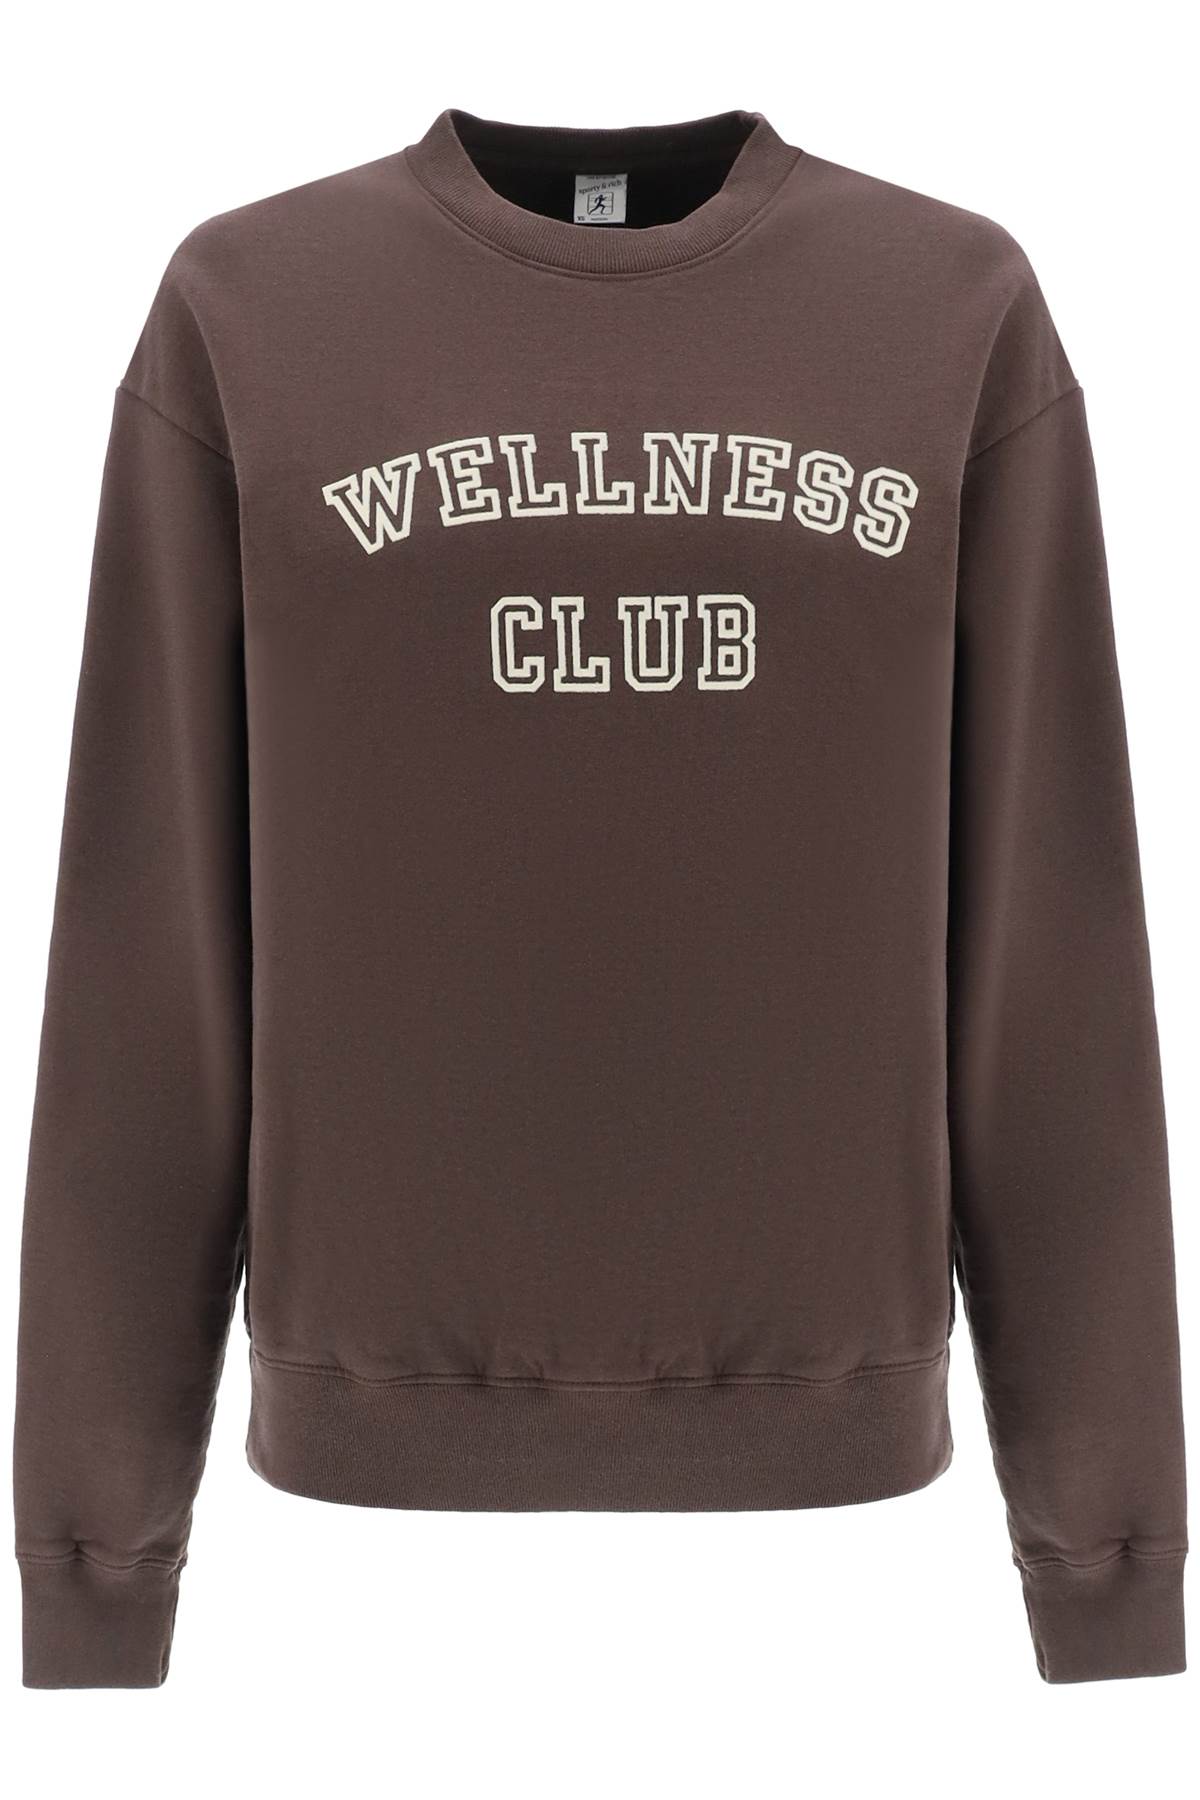 SPORTY AND RICH CREW NECK SWEATSHIRT WITH LETTERING PRINT